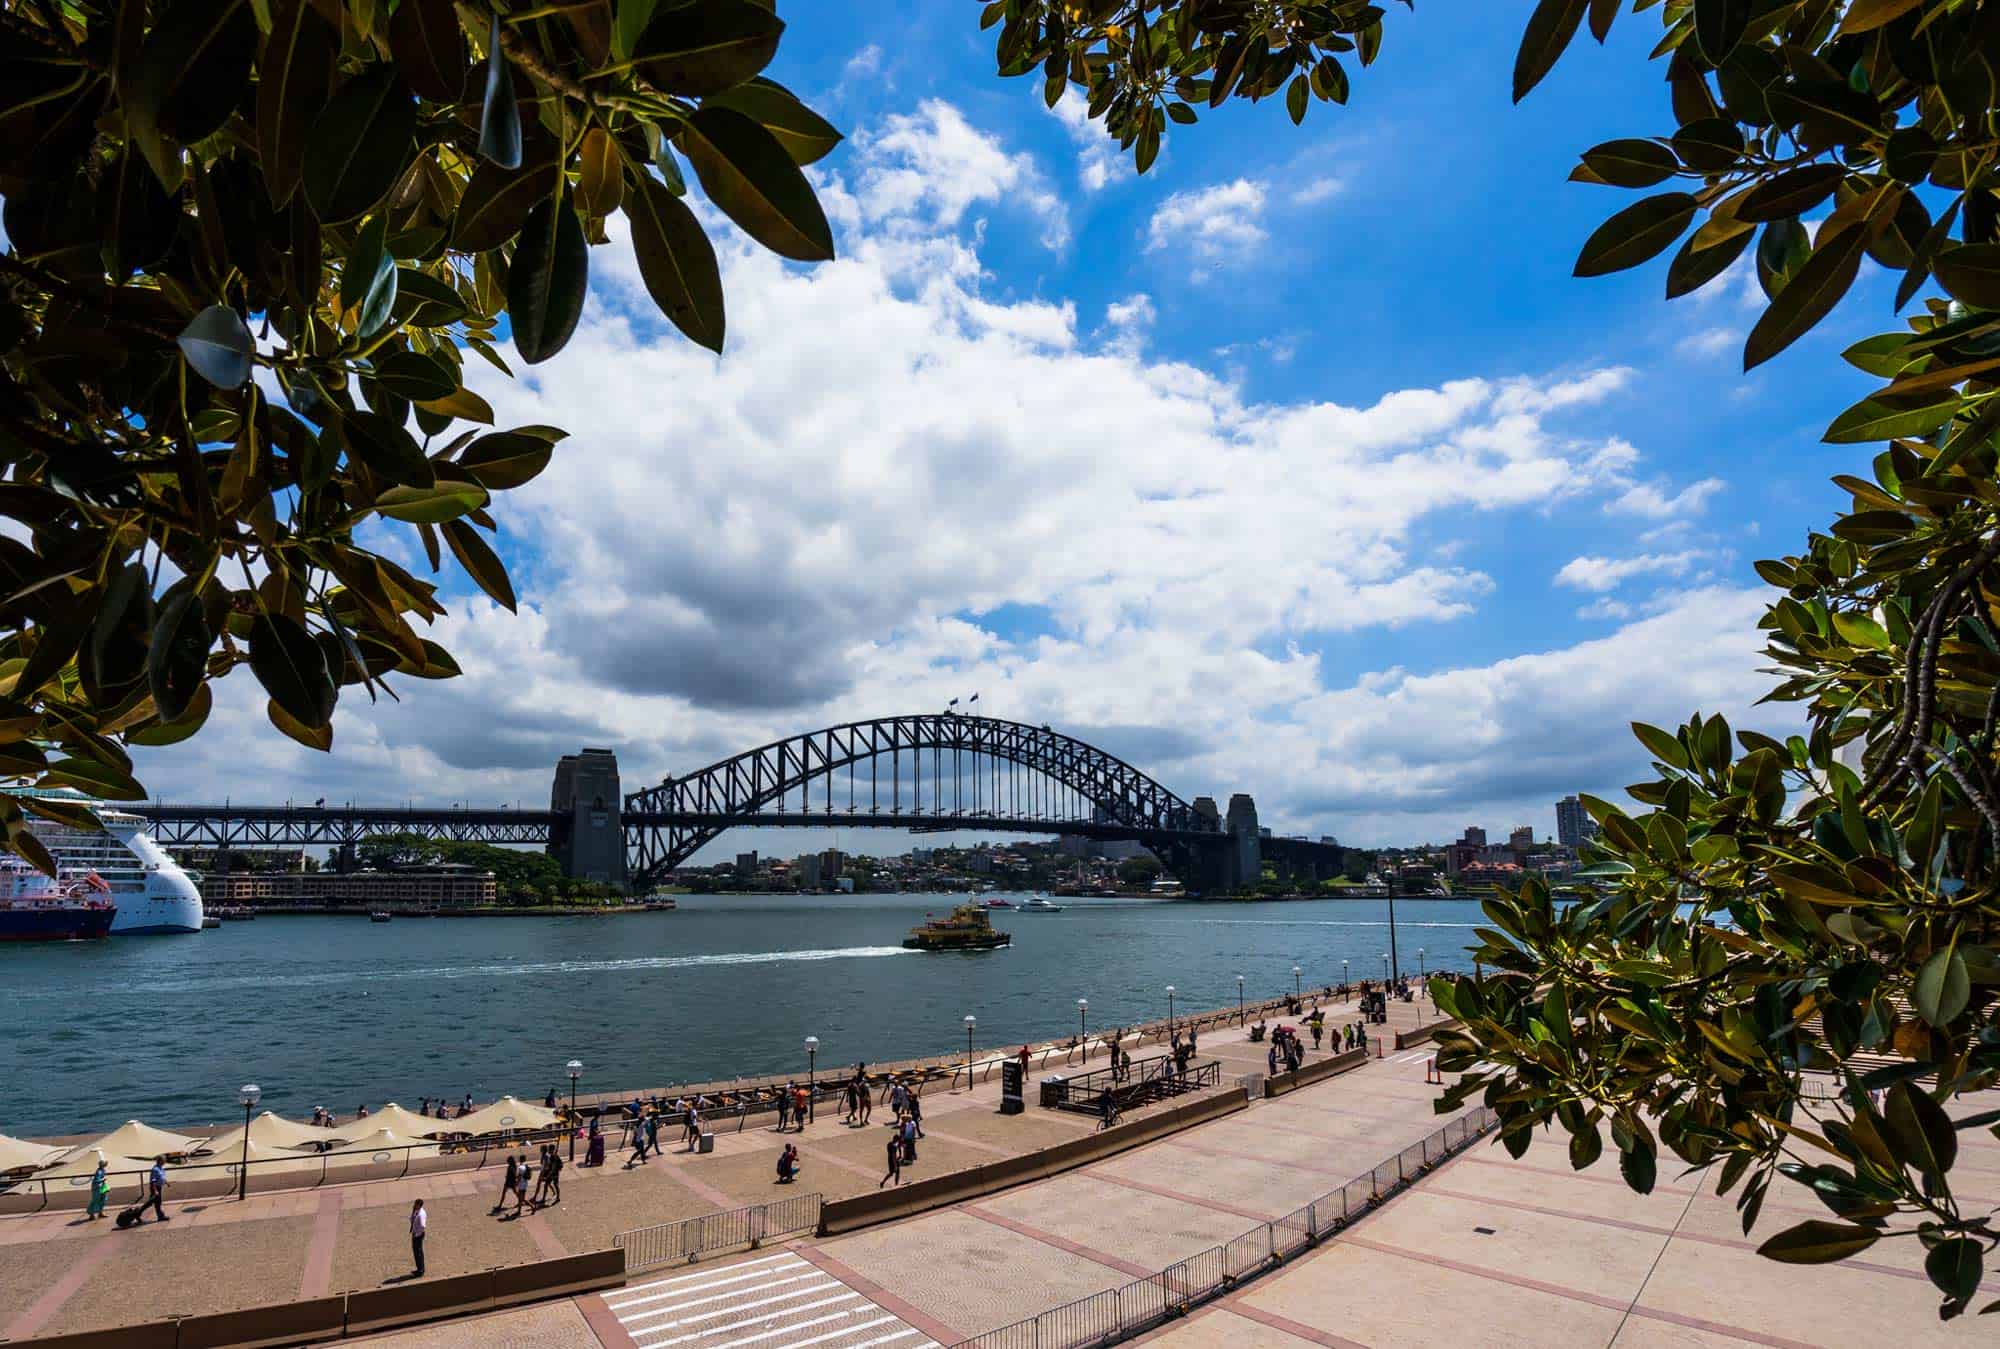 Free Things To Do In Sydney